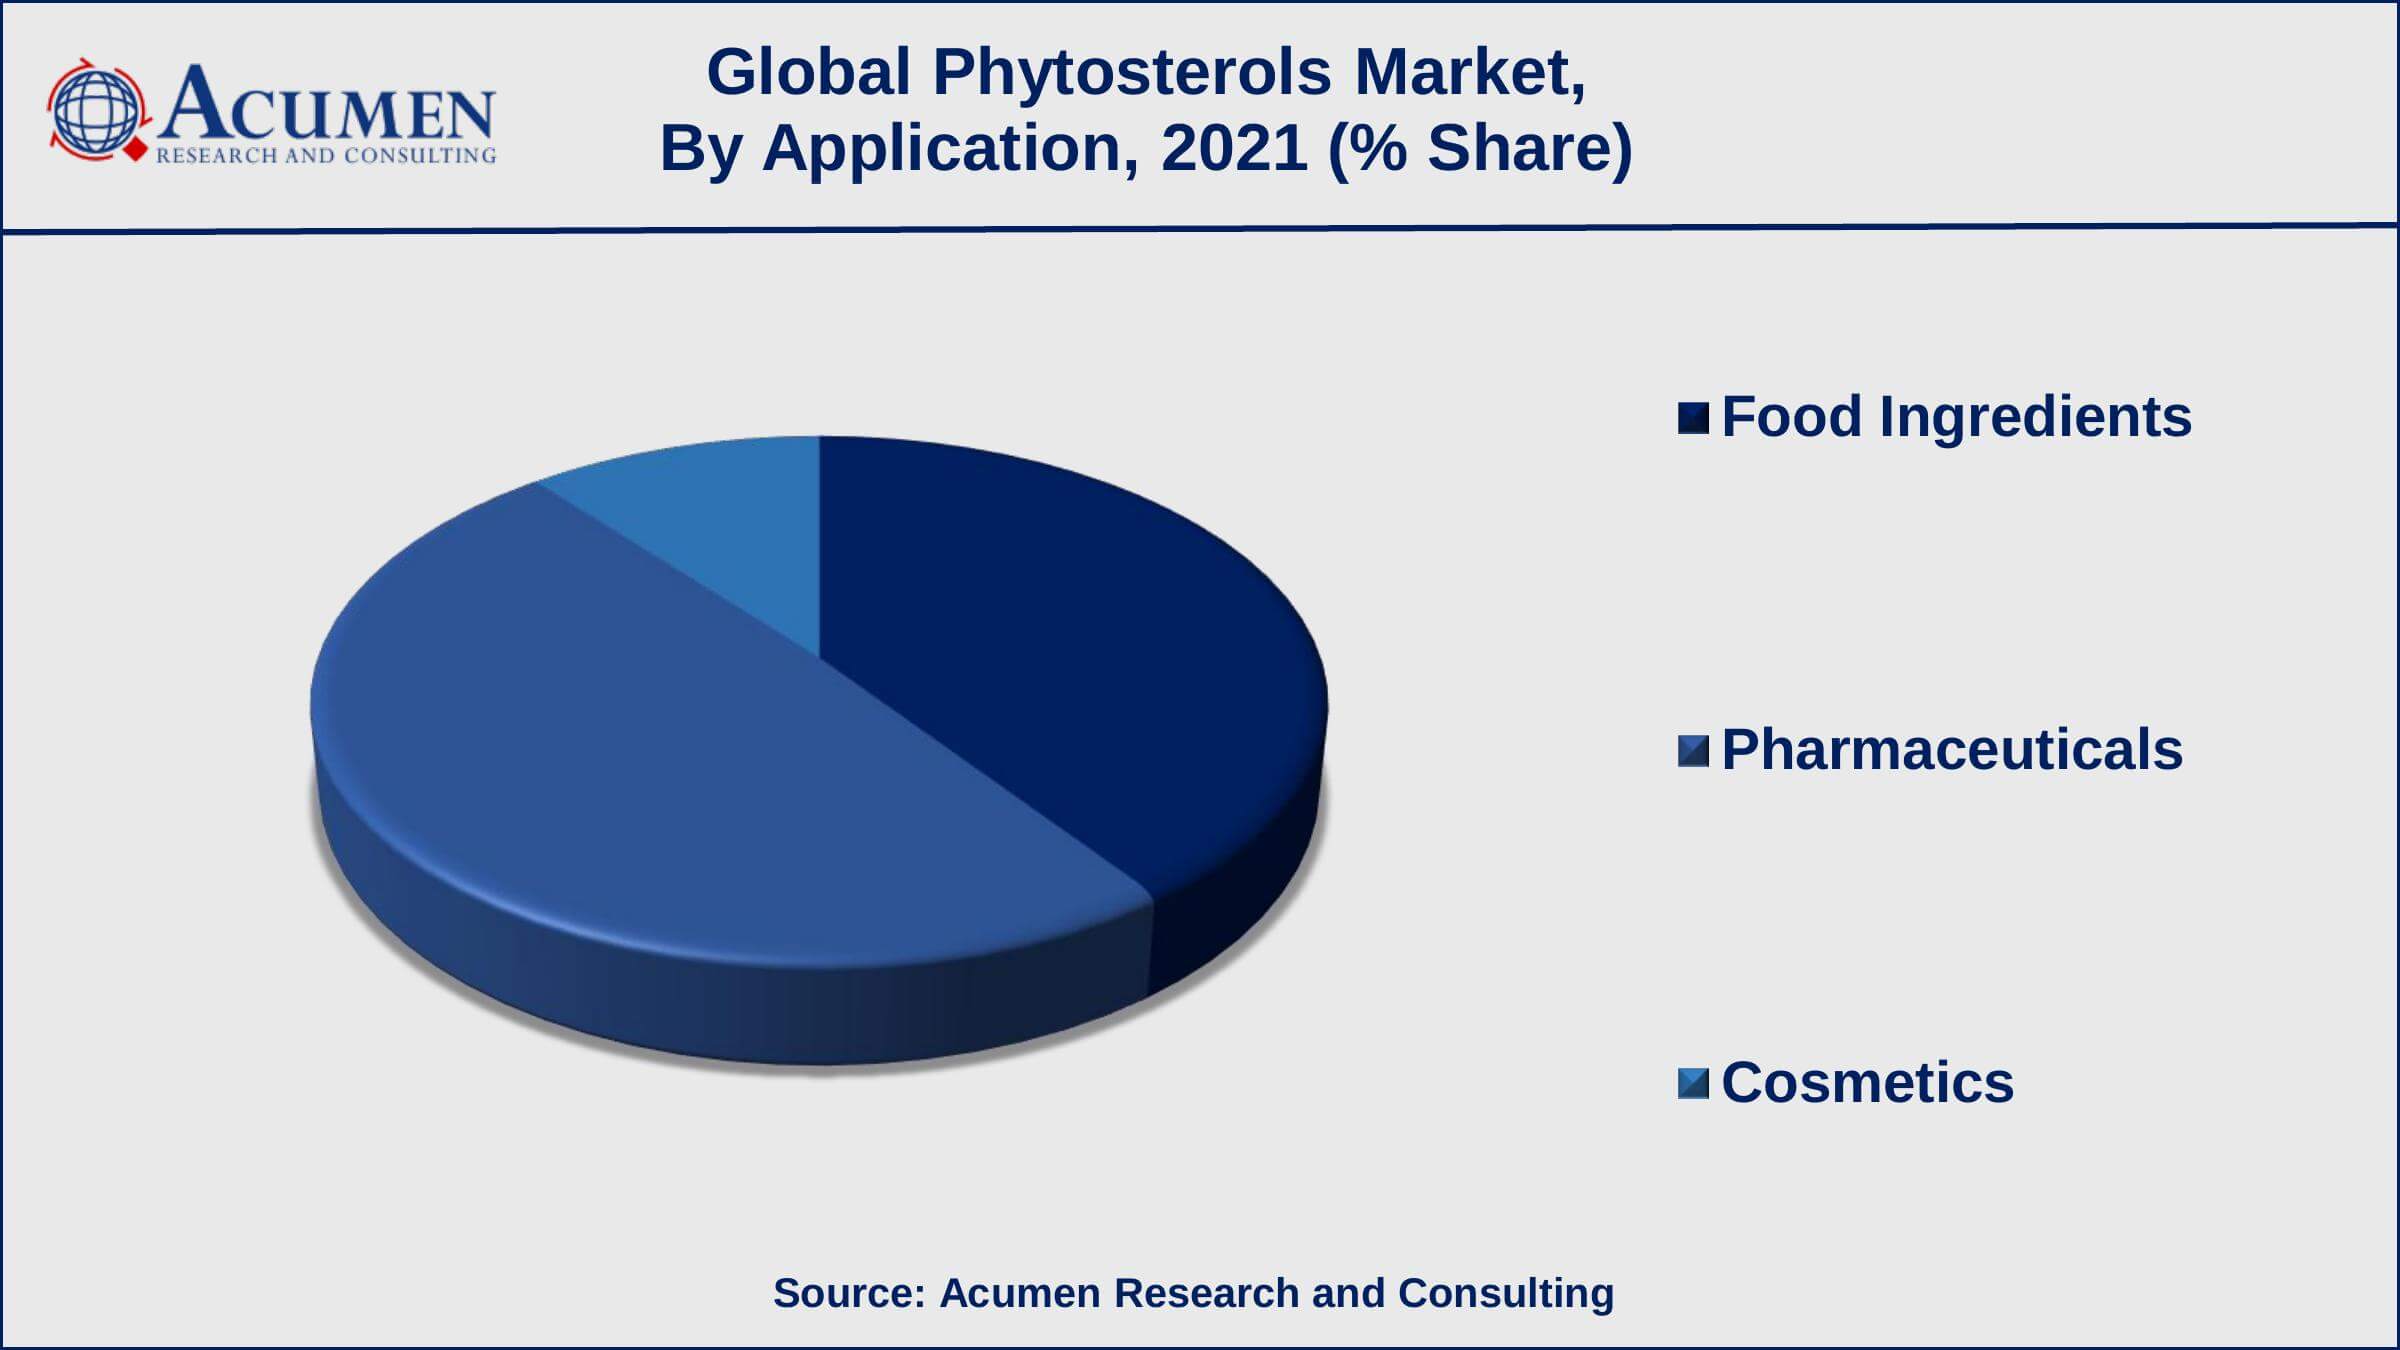 Among application, pharmaceuticals sub-segment gathered 49% shares in 2021